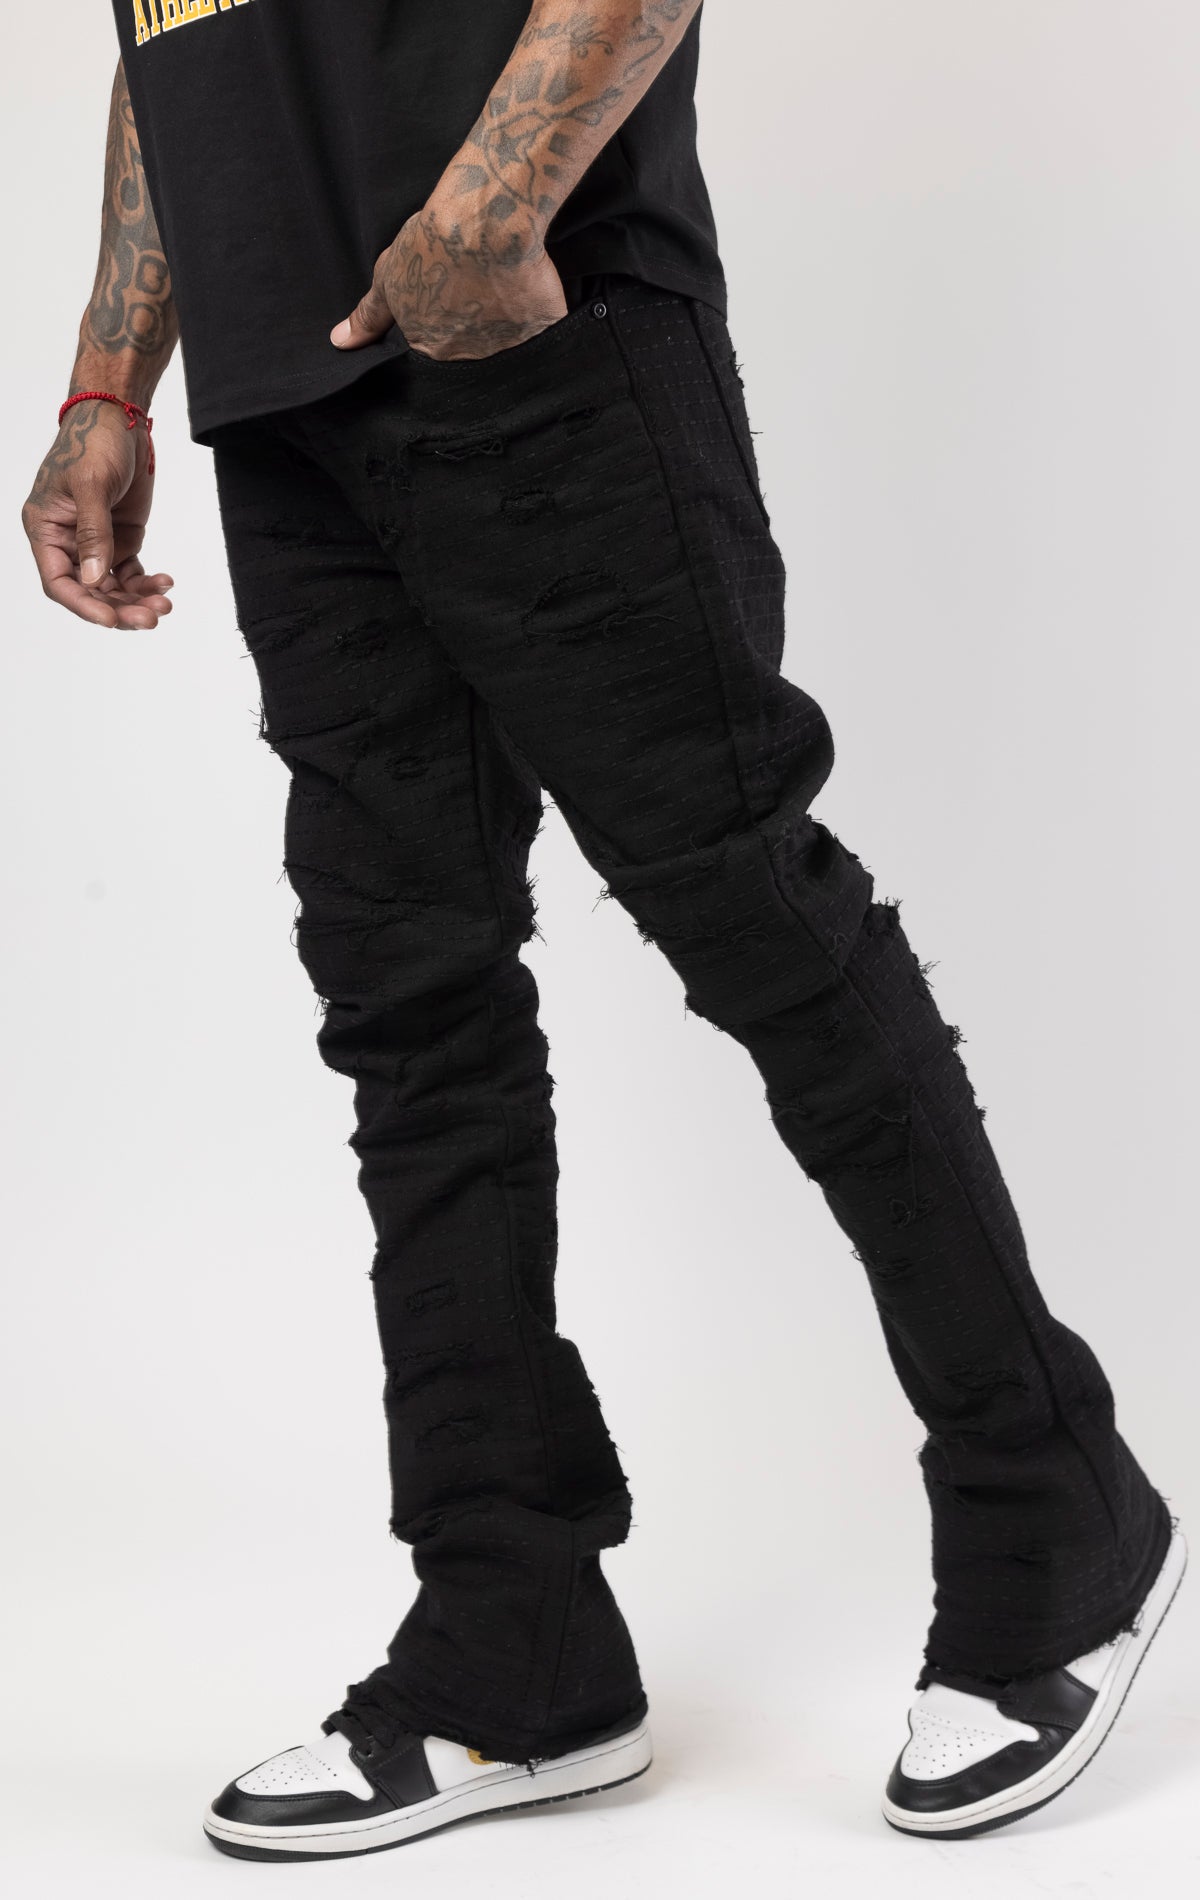 Jet black distressed denim jeans with a ripped and stacked fit.